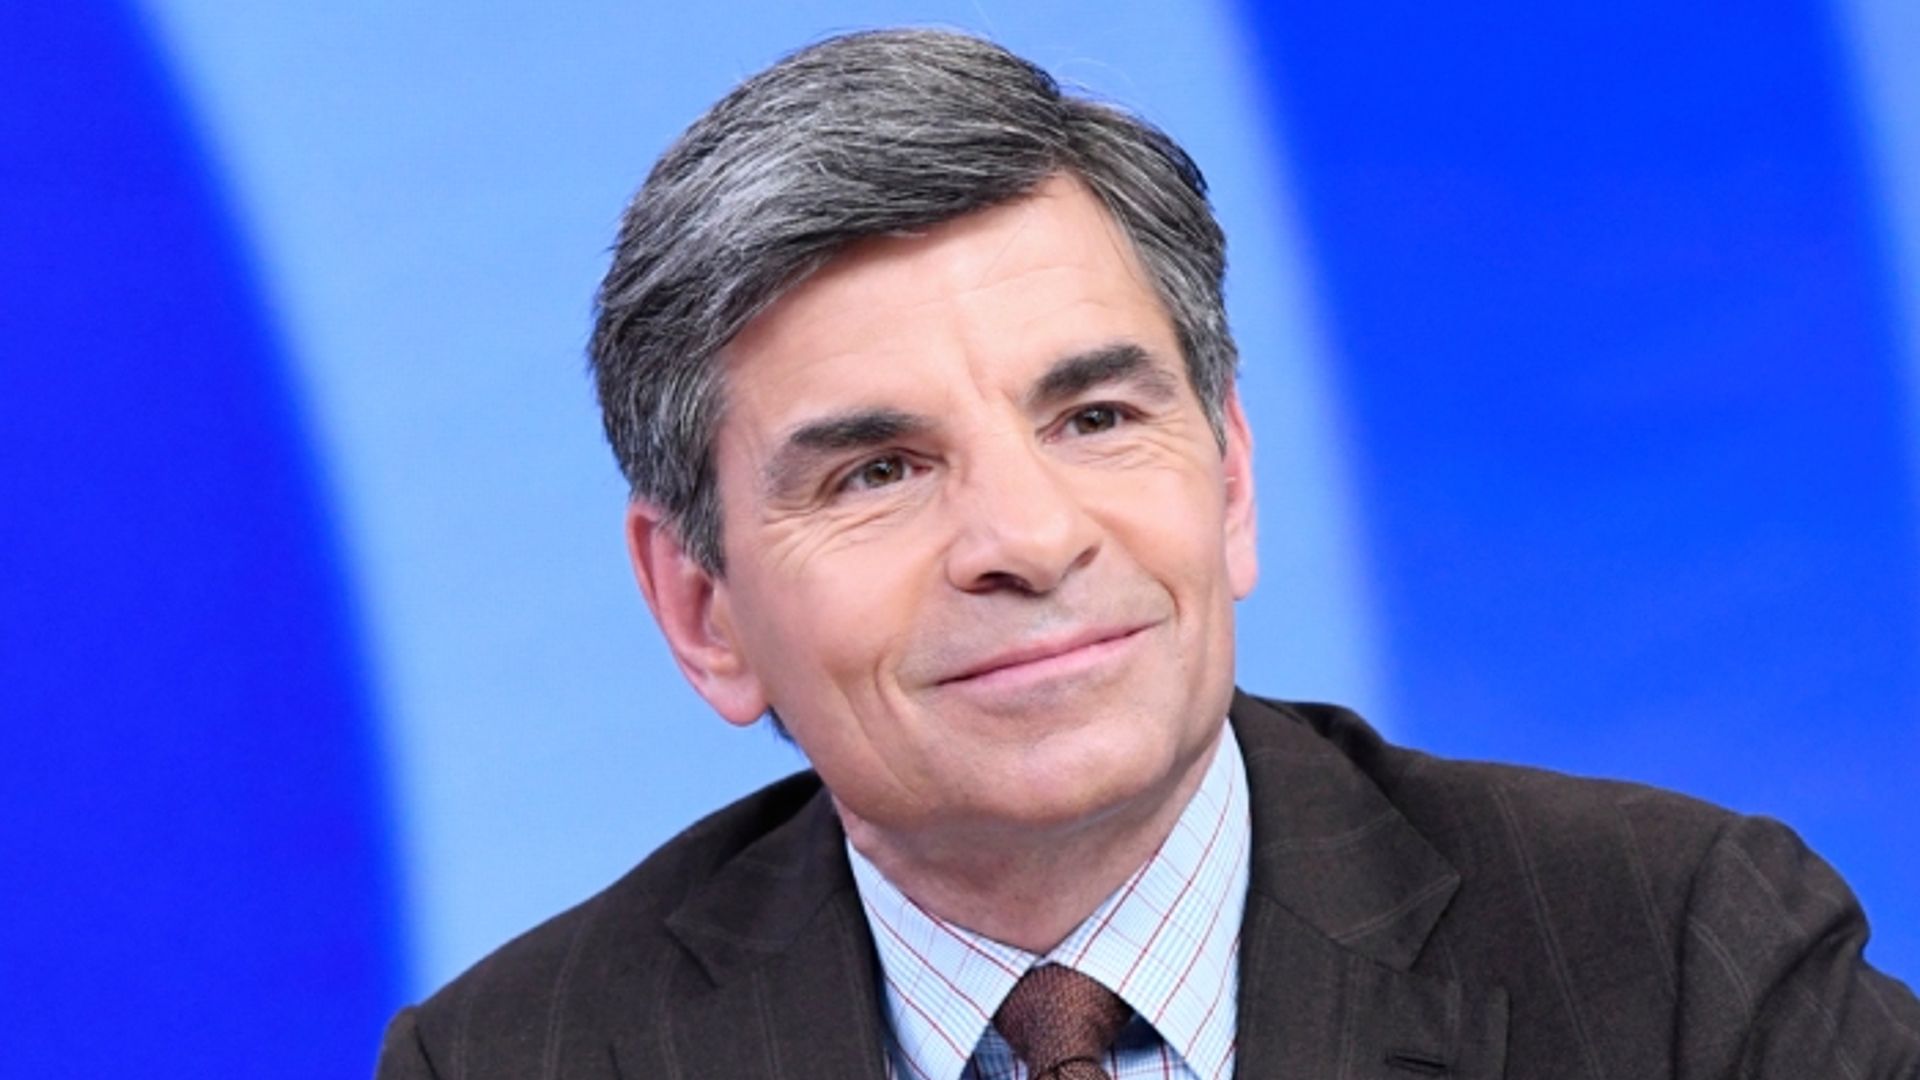 GMA's George Stephanopoulos reveals completely different side as he steps out with famous family